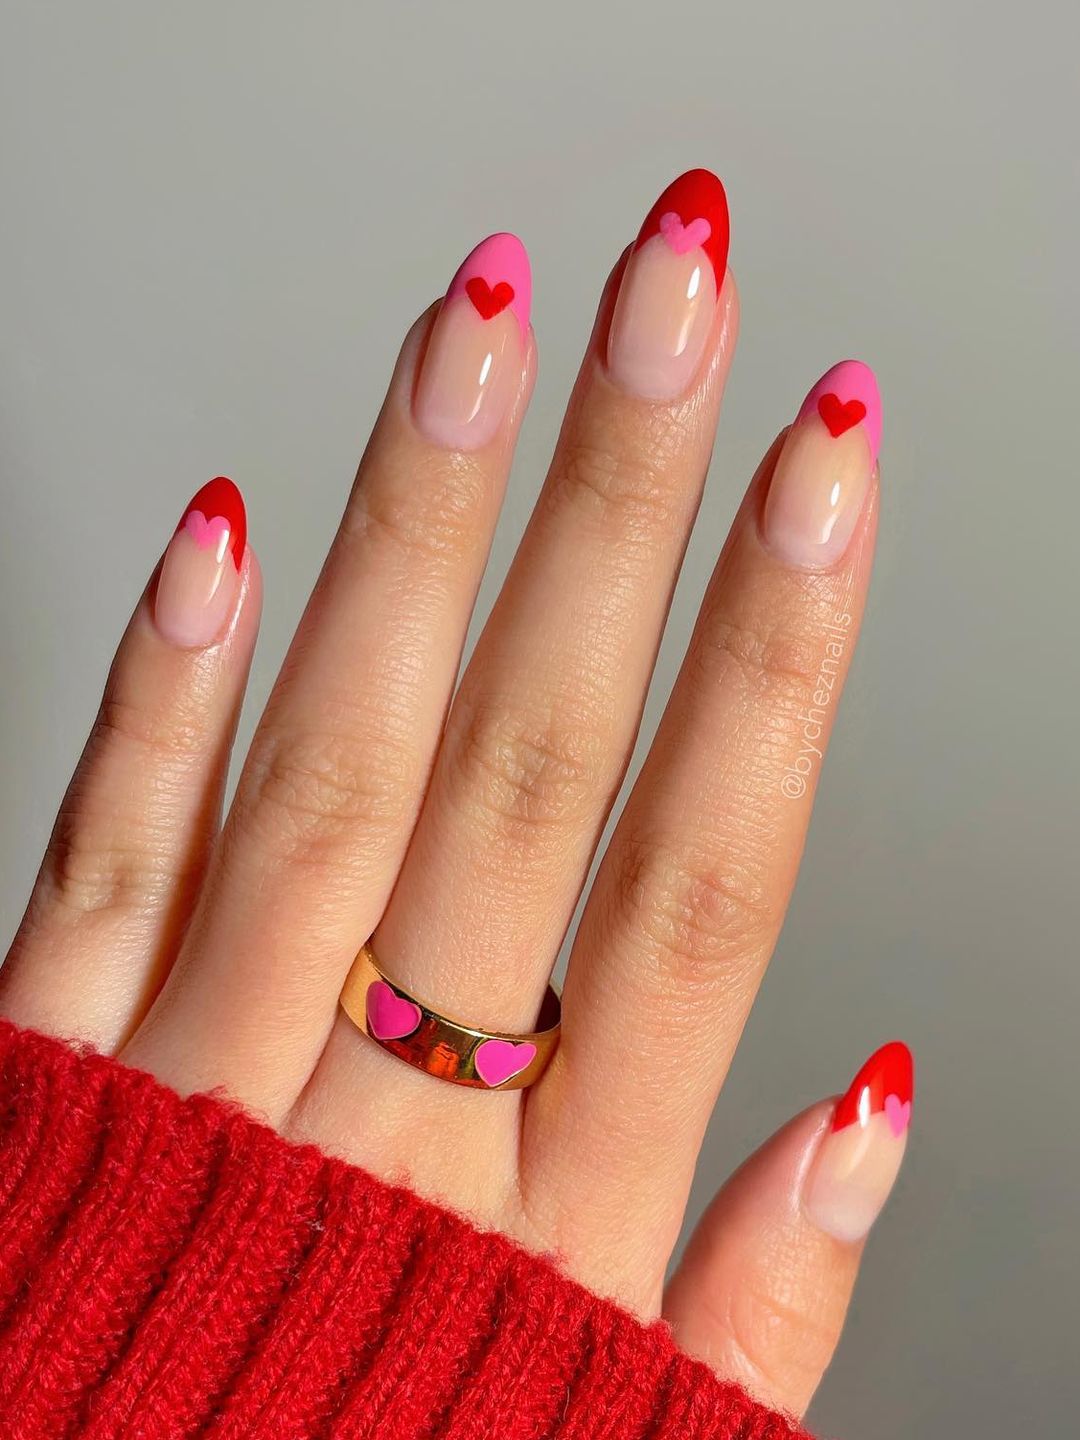 Nails with alternating red and pink hearts and tips 